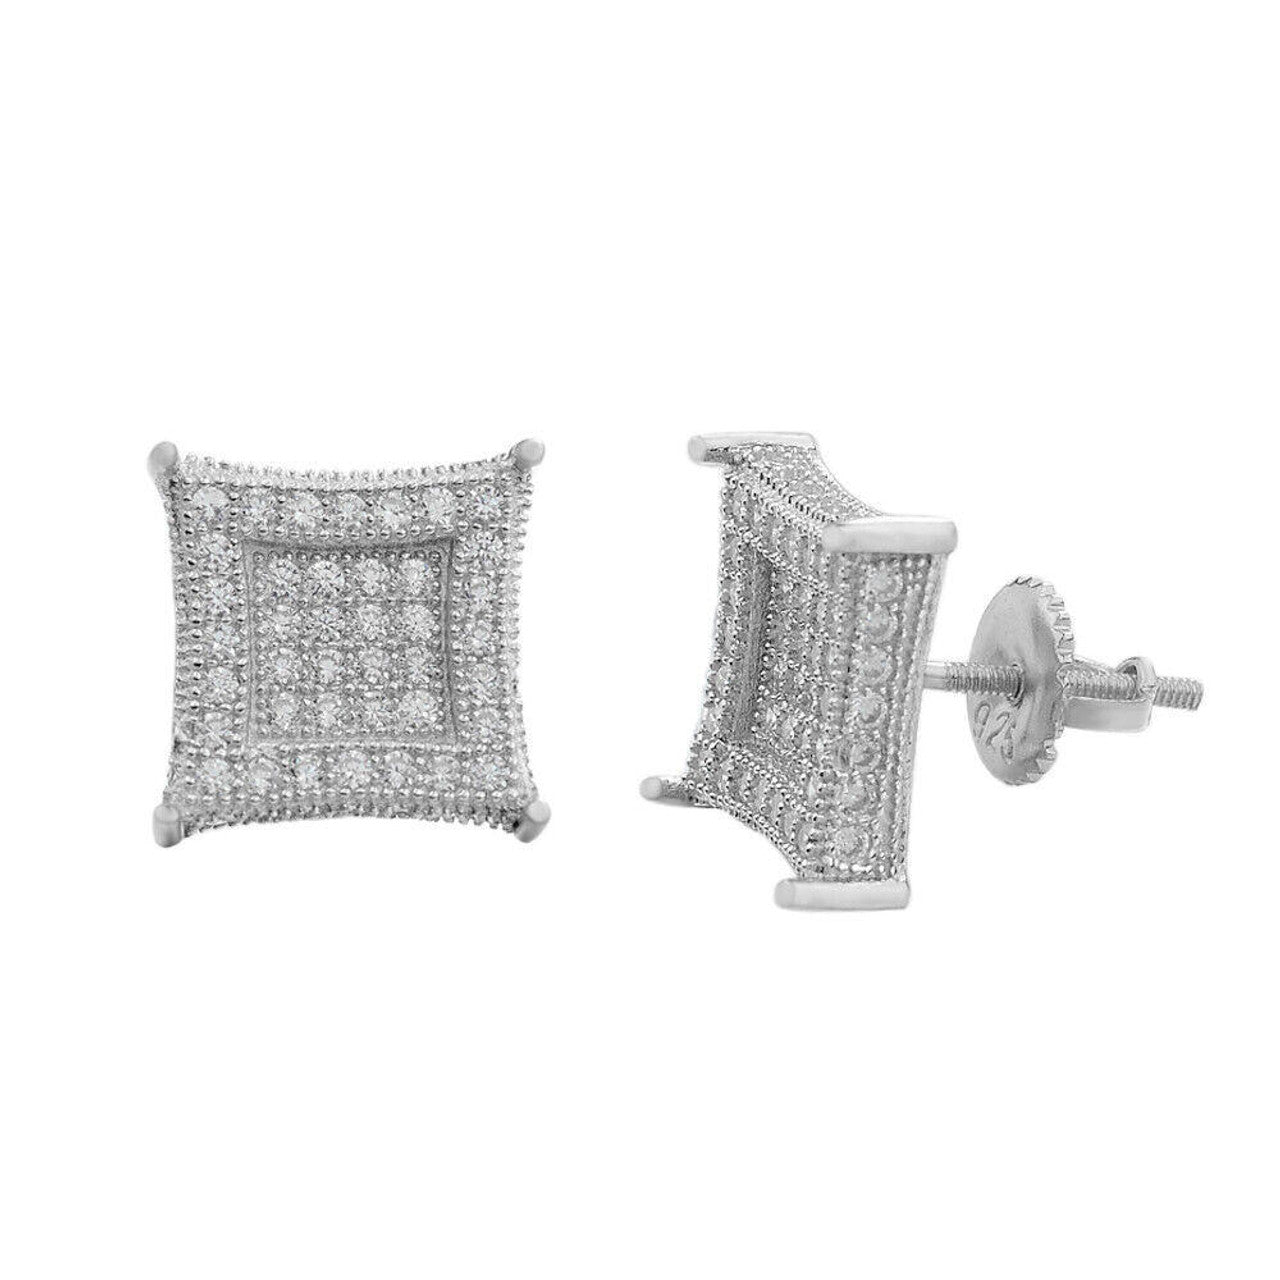 1.17ct VVS CVD LAB Real Diamond Men's WHITE GOLD Solid 925 Silver Iced Hip Hop Kite Earrings